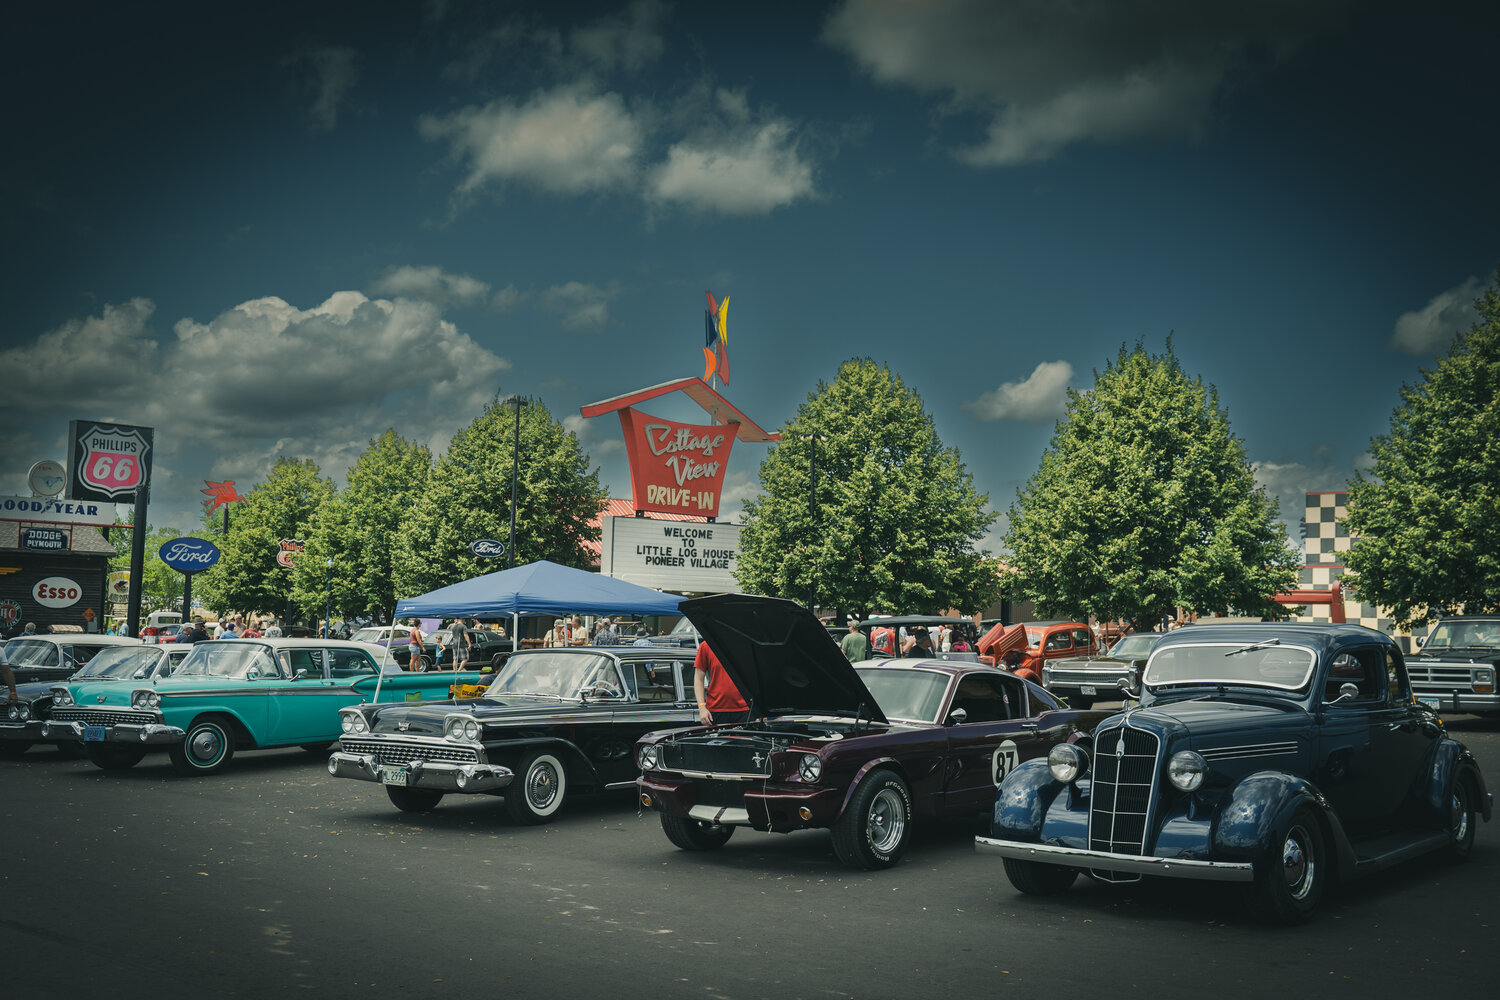 The antique car show is a huge attraction for Little Log House event guests and the slew of antique service signs plus the old Cottage View Drive-In sign takes visitors back in time.